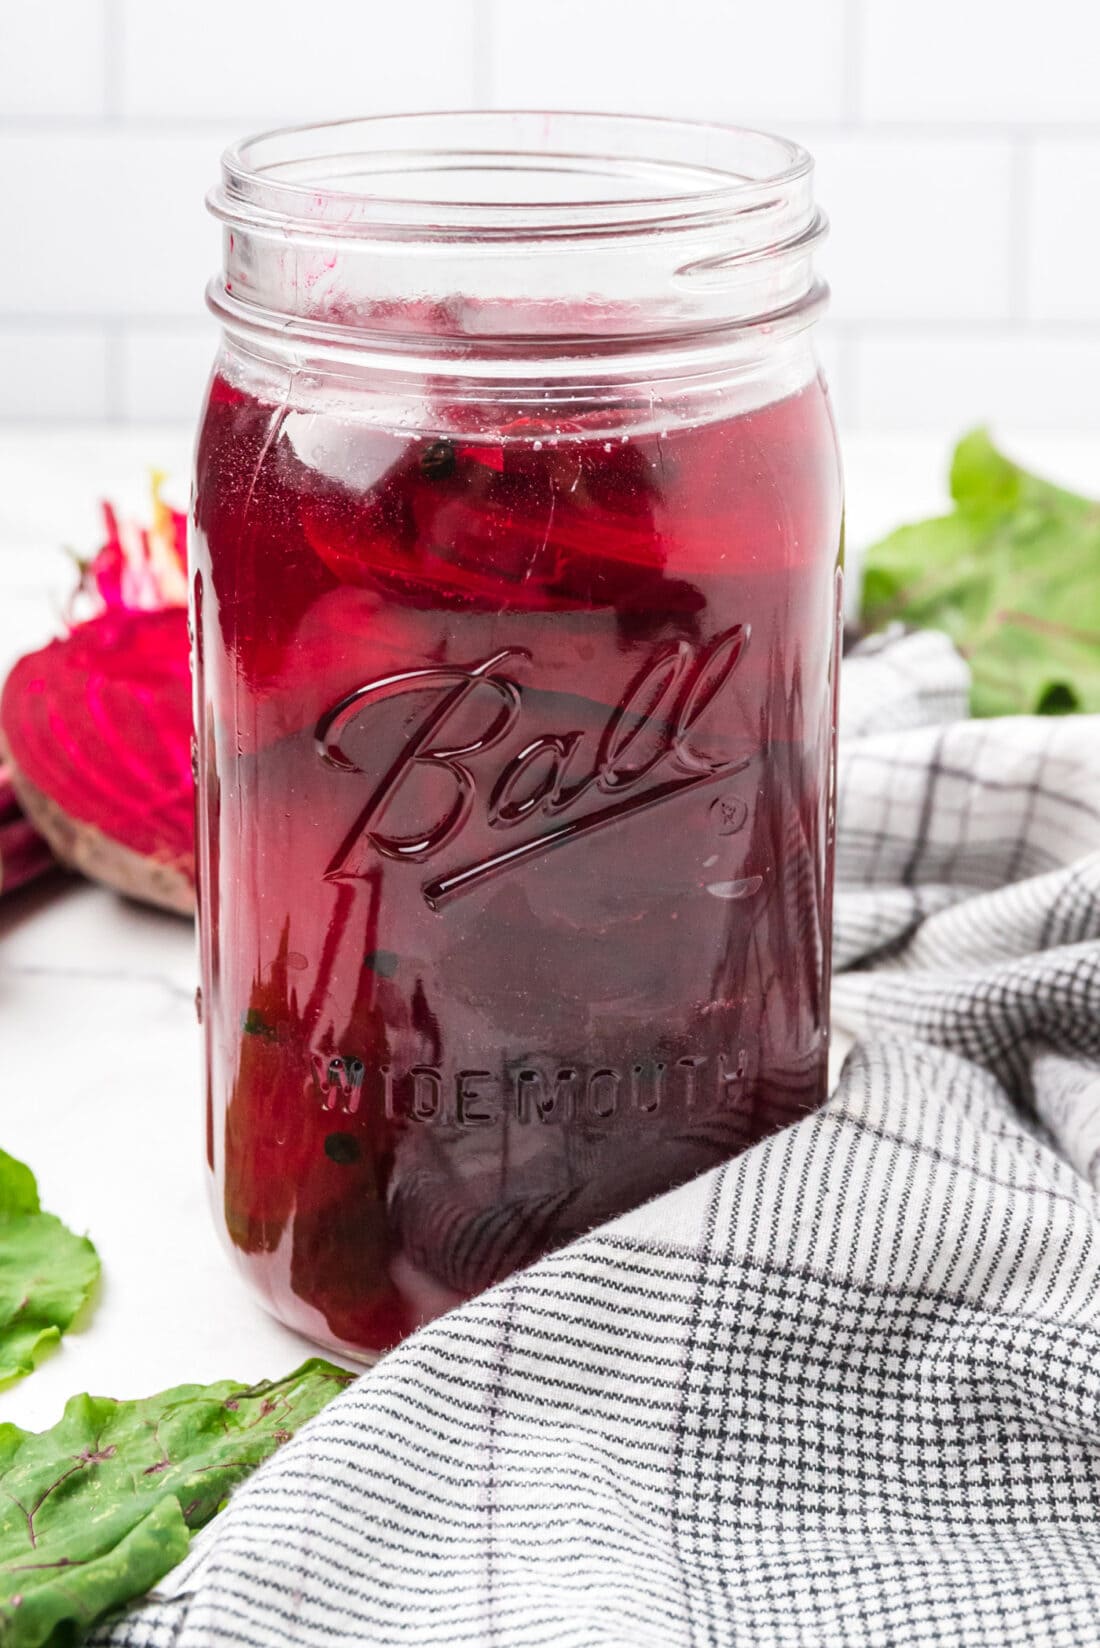 Pickled Beets in a jar